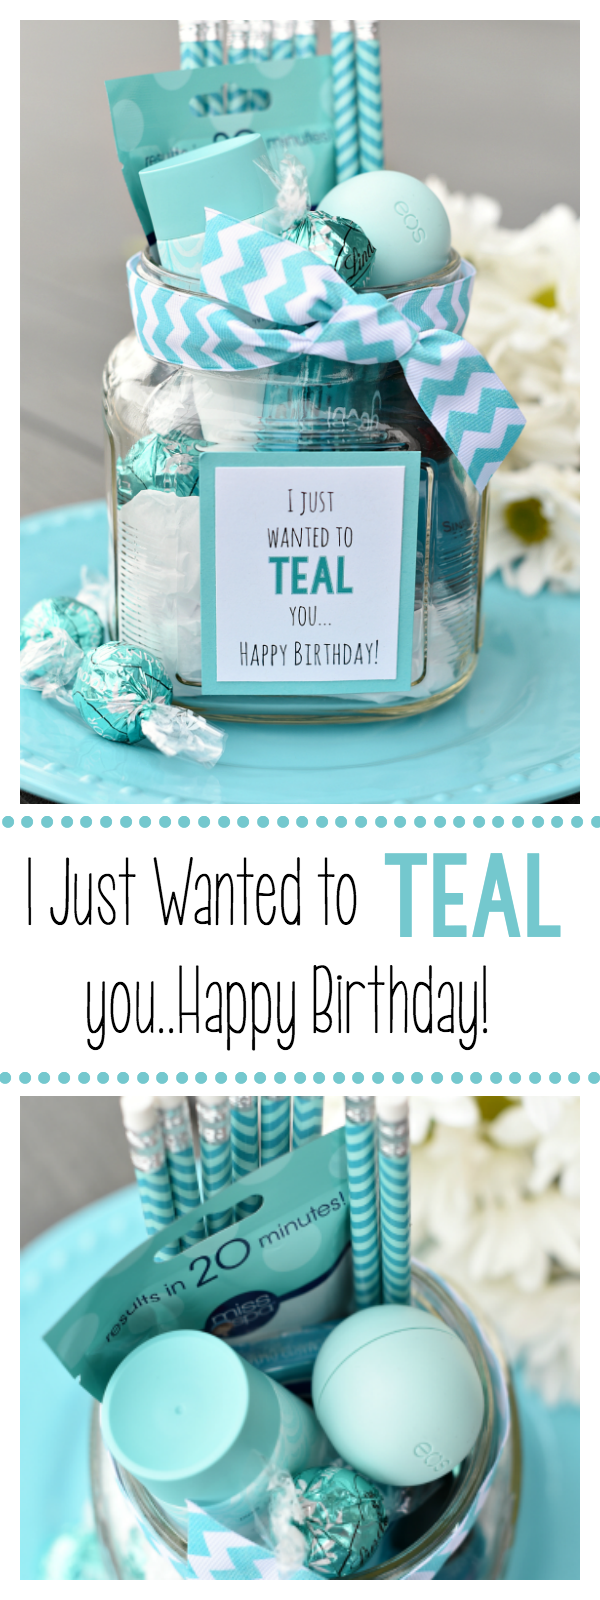 Teal Birthday Gift Idea for Friends - Fun-Squared